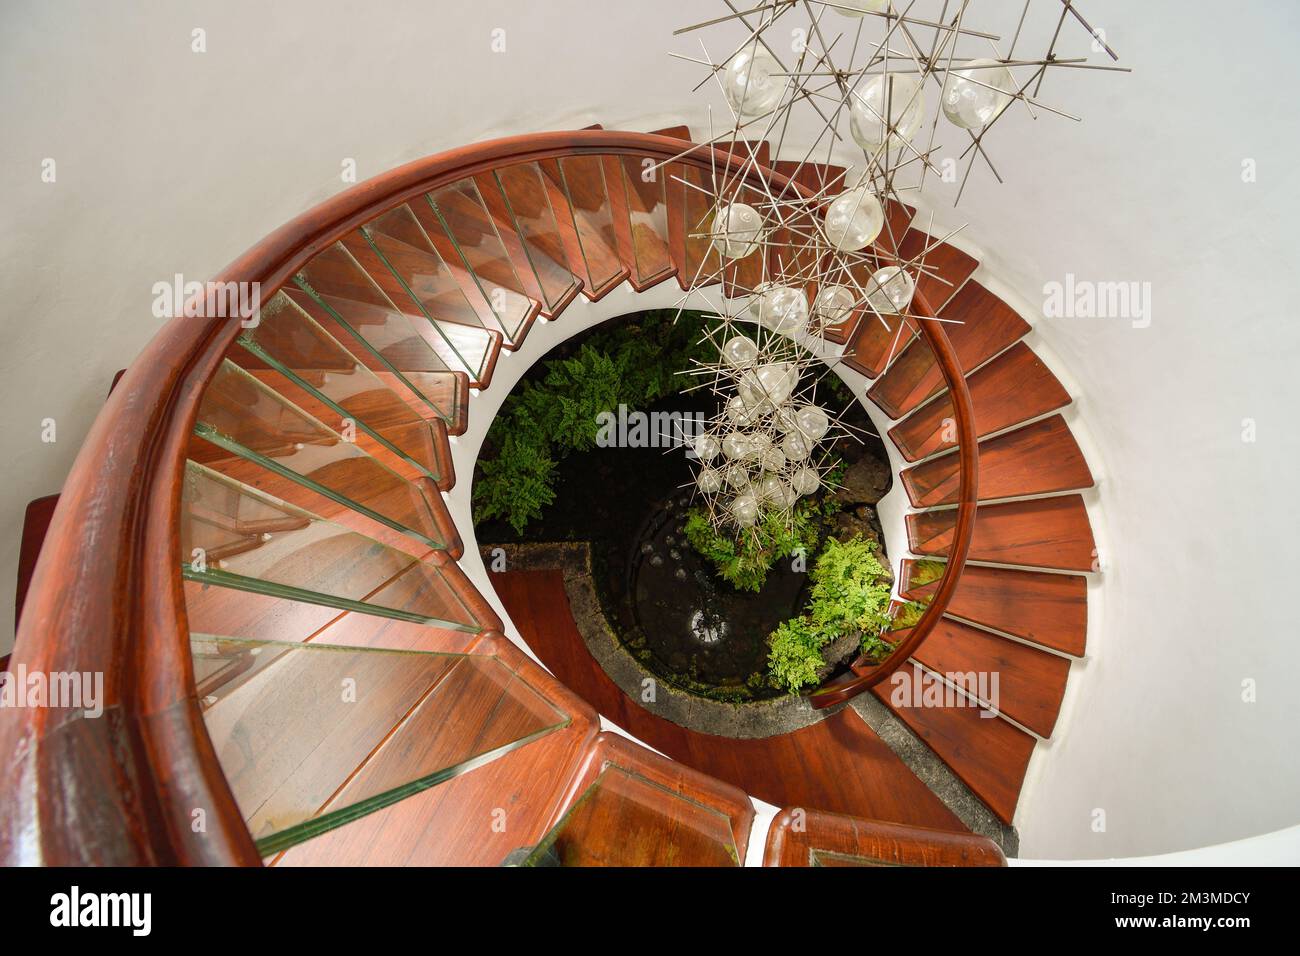 Spiral stairs with hanging lamp in the middle Stock Photo